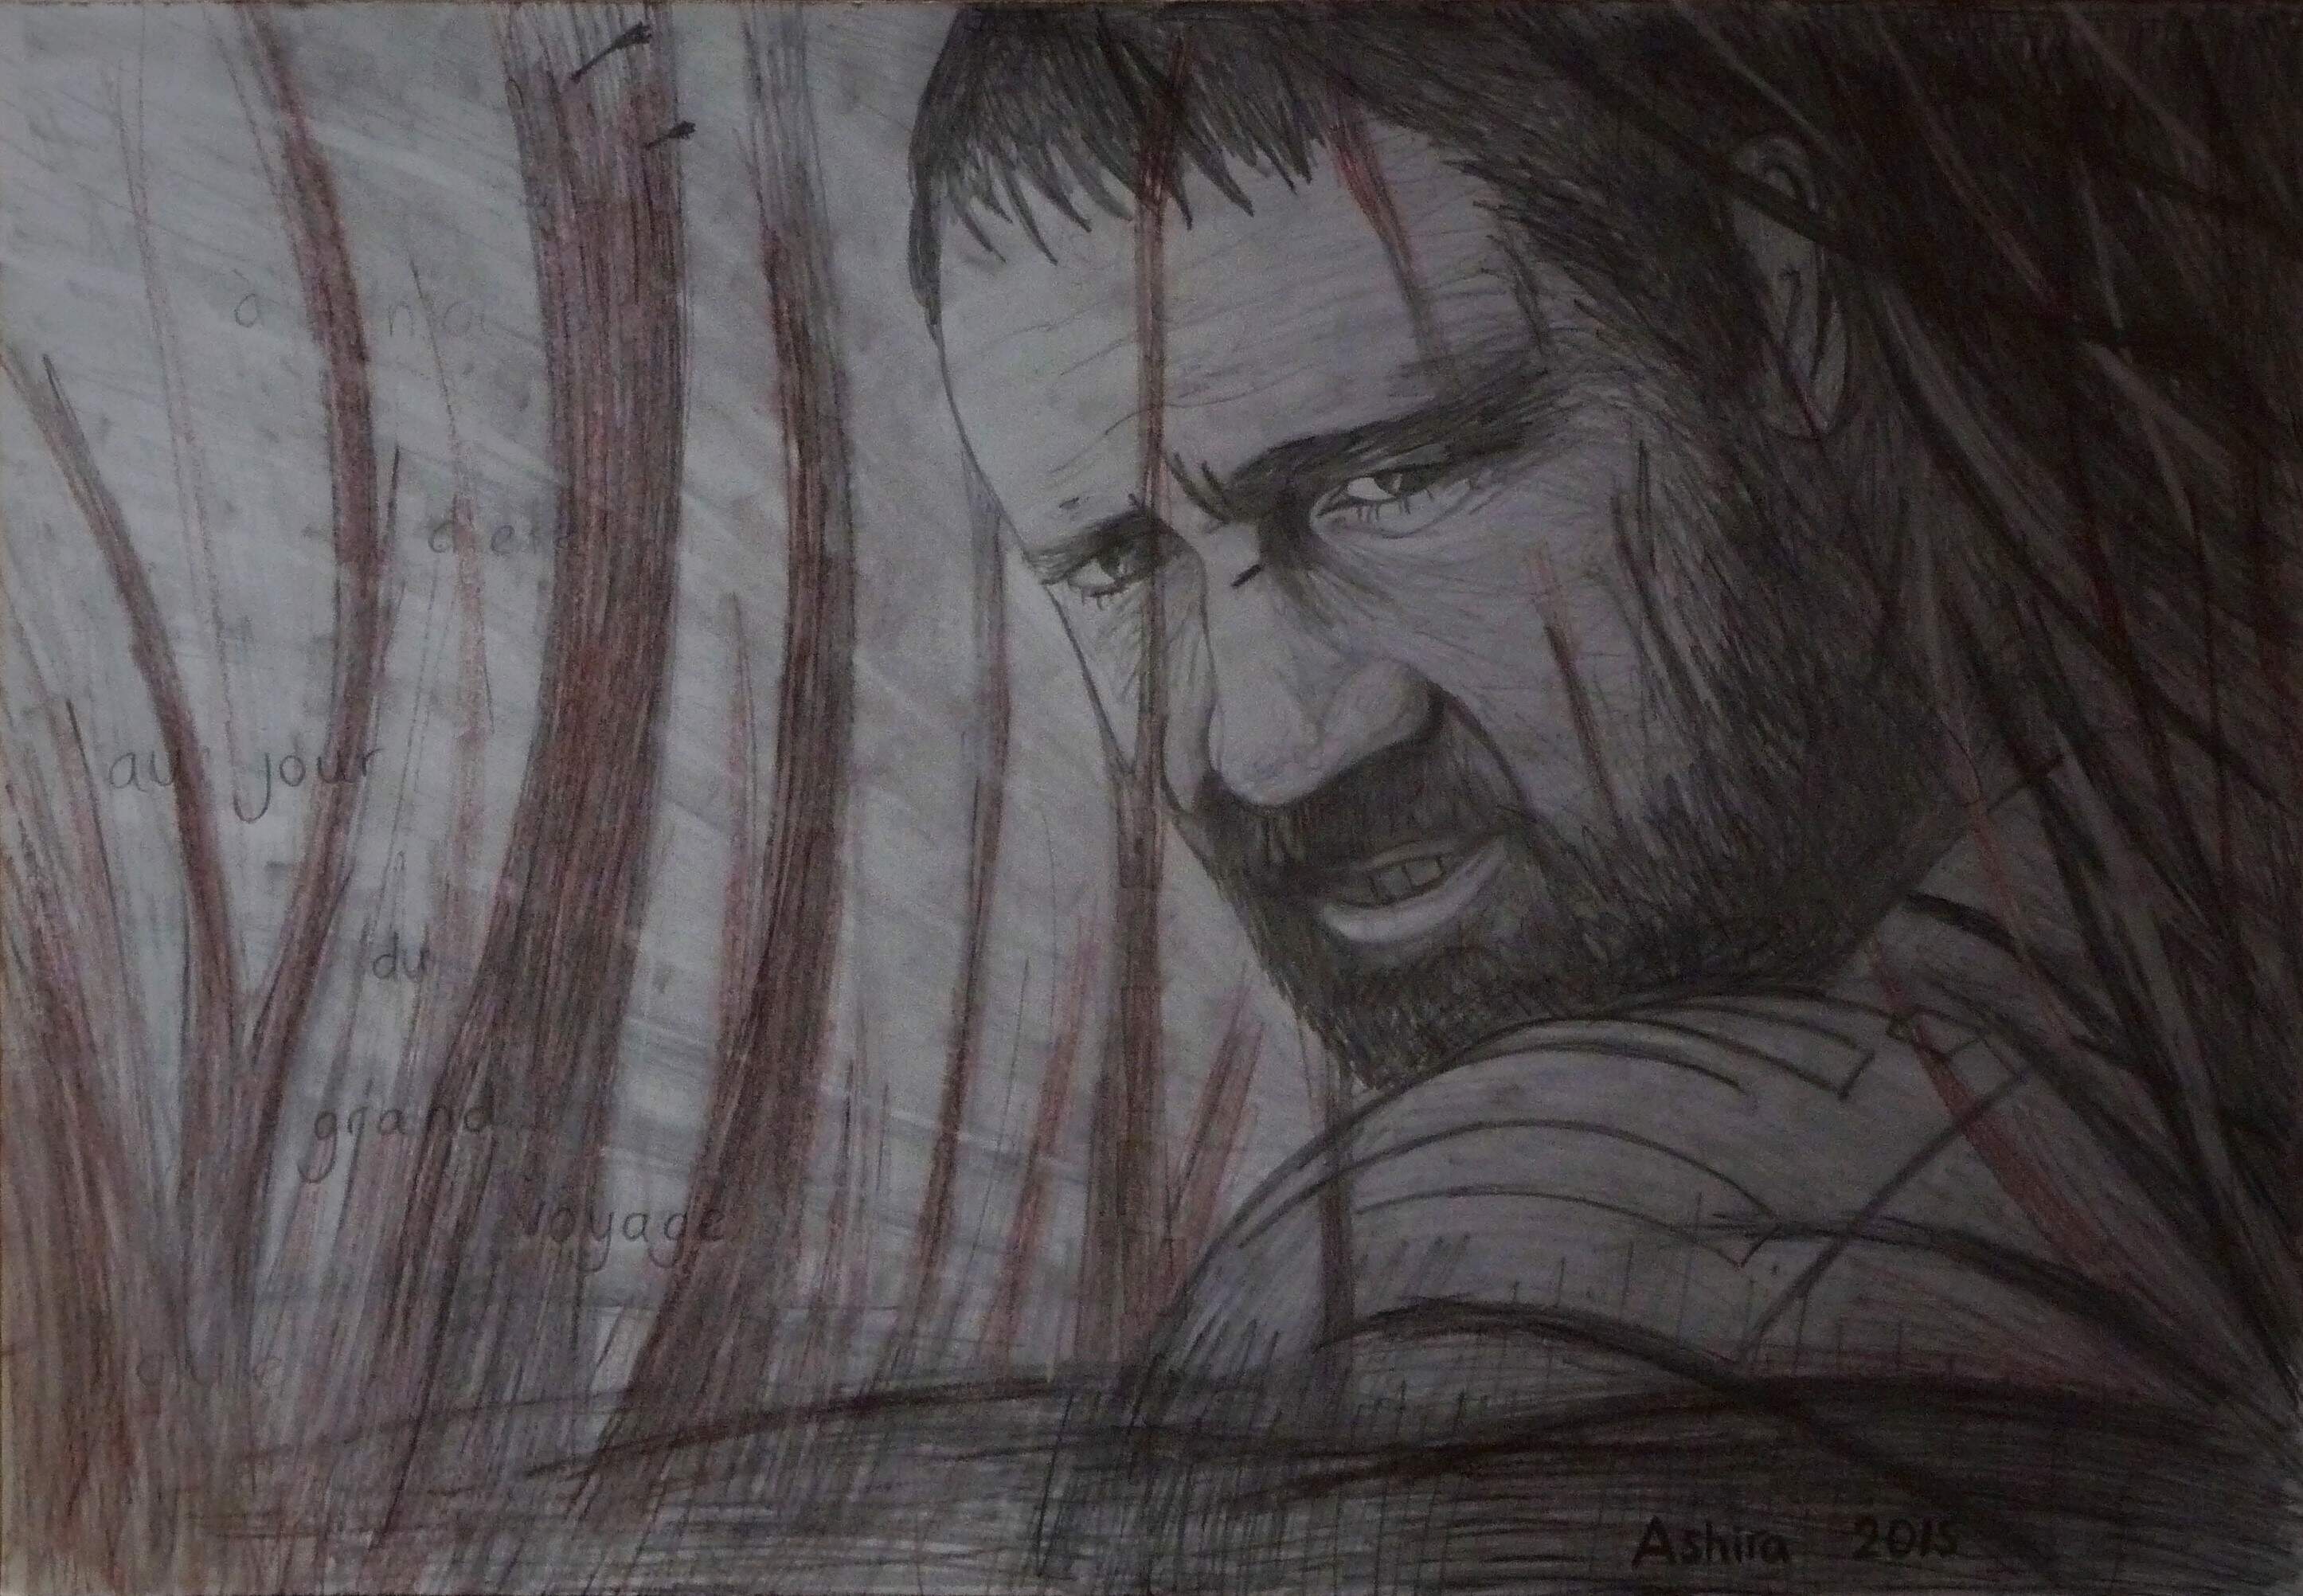 Russell Crowe - may 2015, pencil & graphite, 38x55 cm